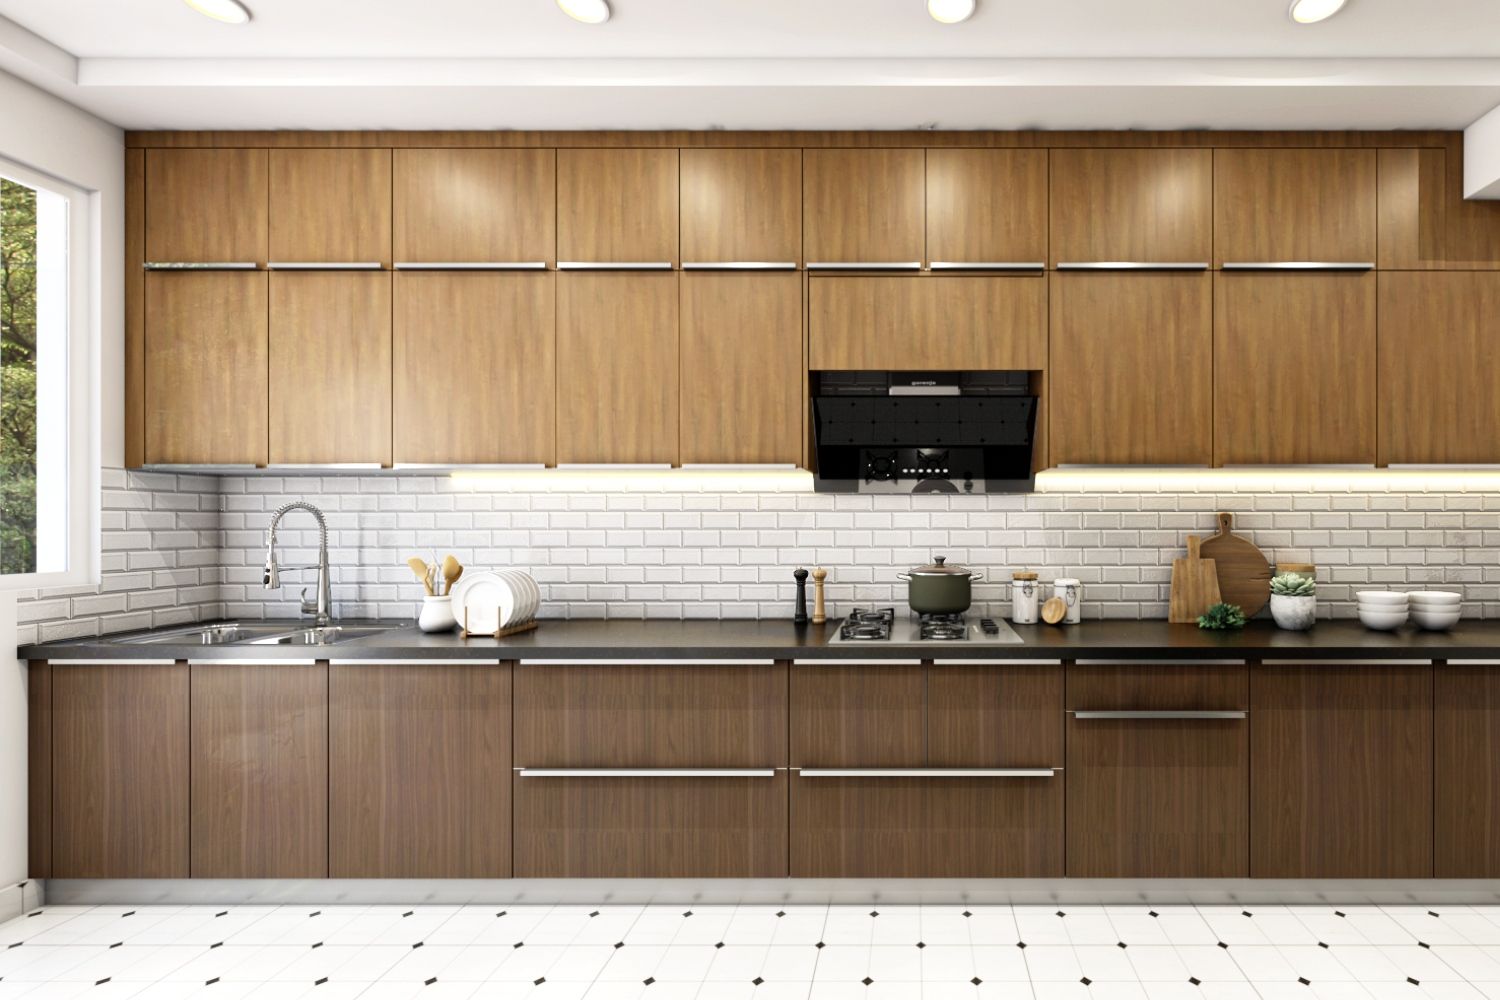 Industrial Modular Parallel Kitchen Design with Walnut and Teak Accents